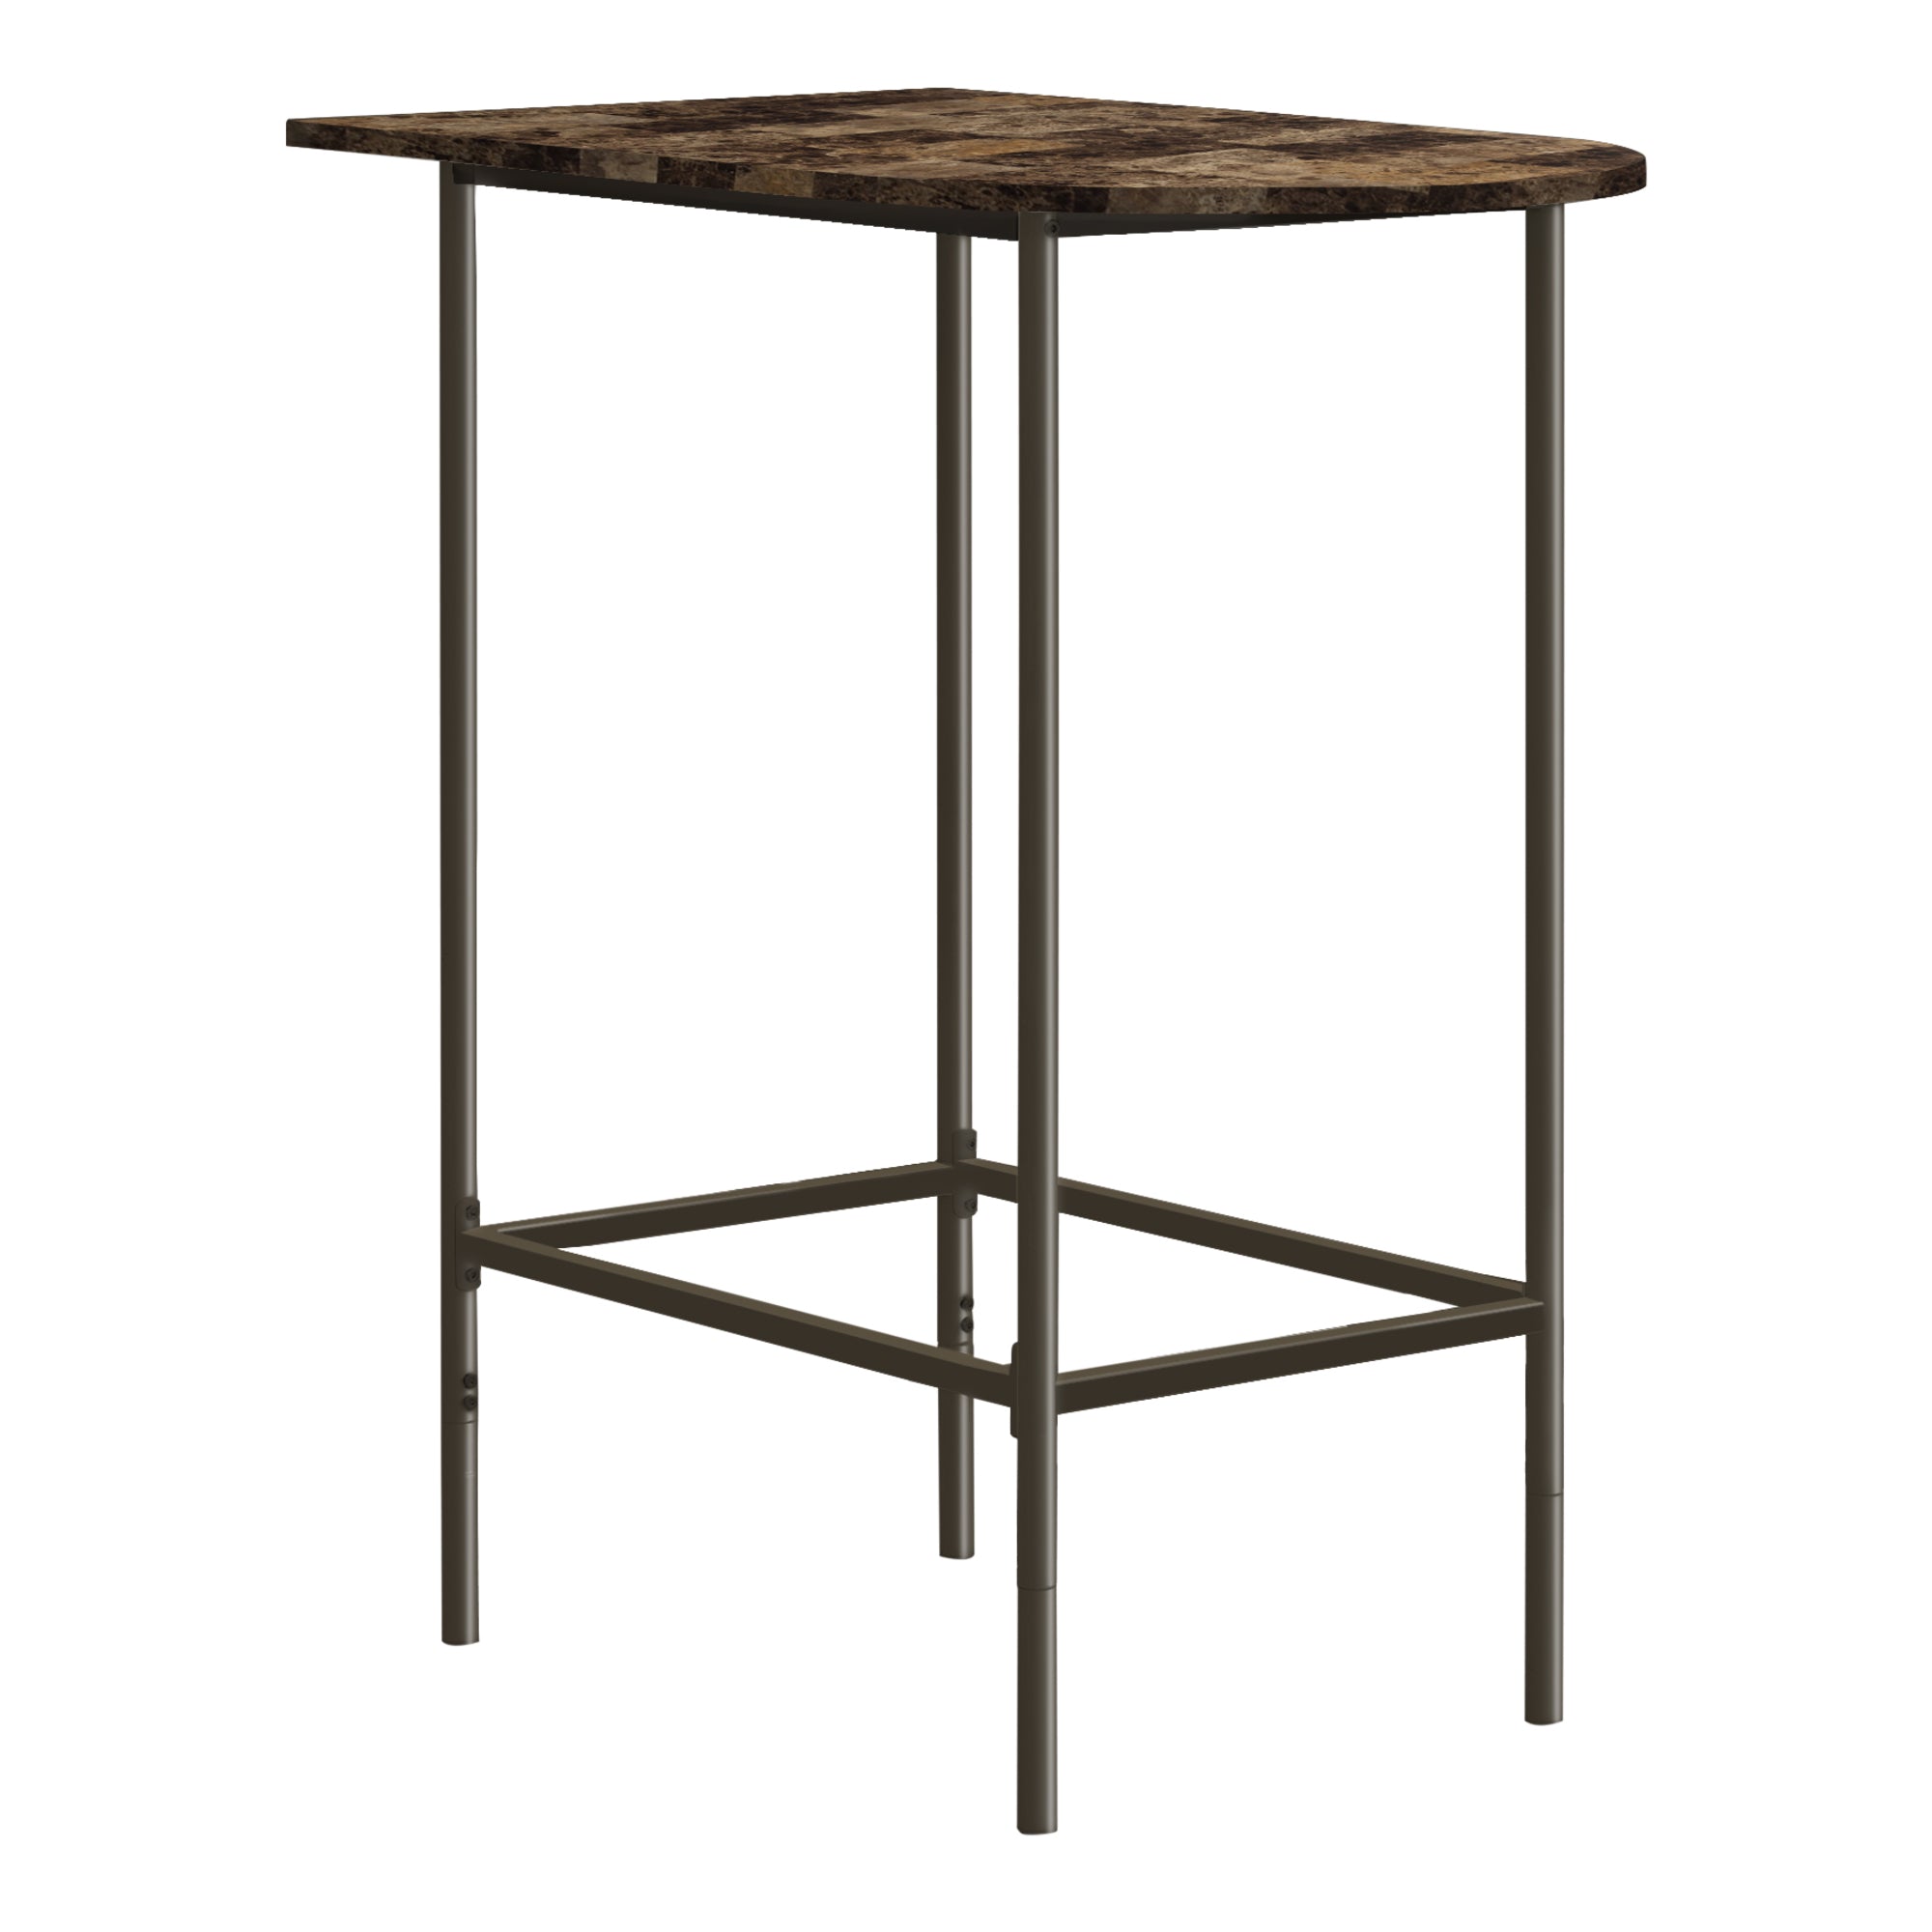 MN-732315    Home Bar, Bar Table, Bar Height, Pub Table, 36" Rectangular, Small, Kitchen, Living Room, Metal, Laminate, Brown Marble Look, Bronze, Transitional